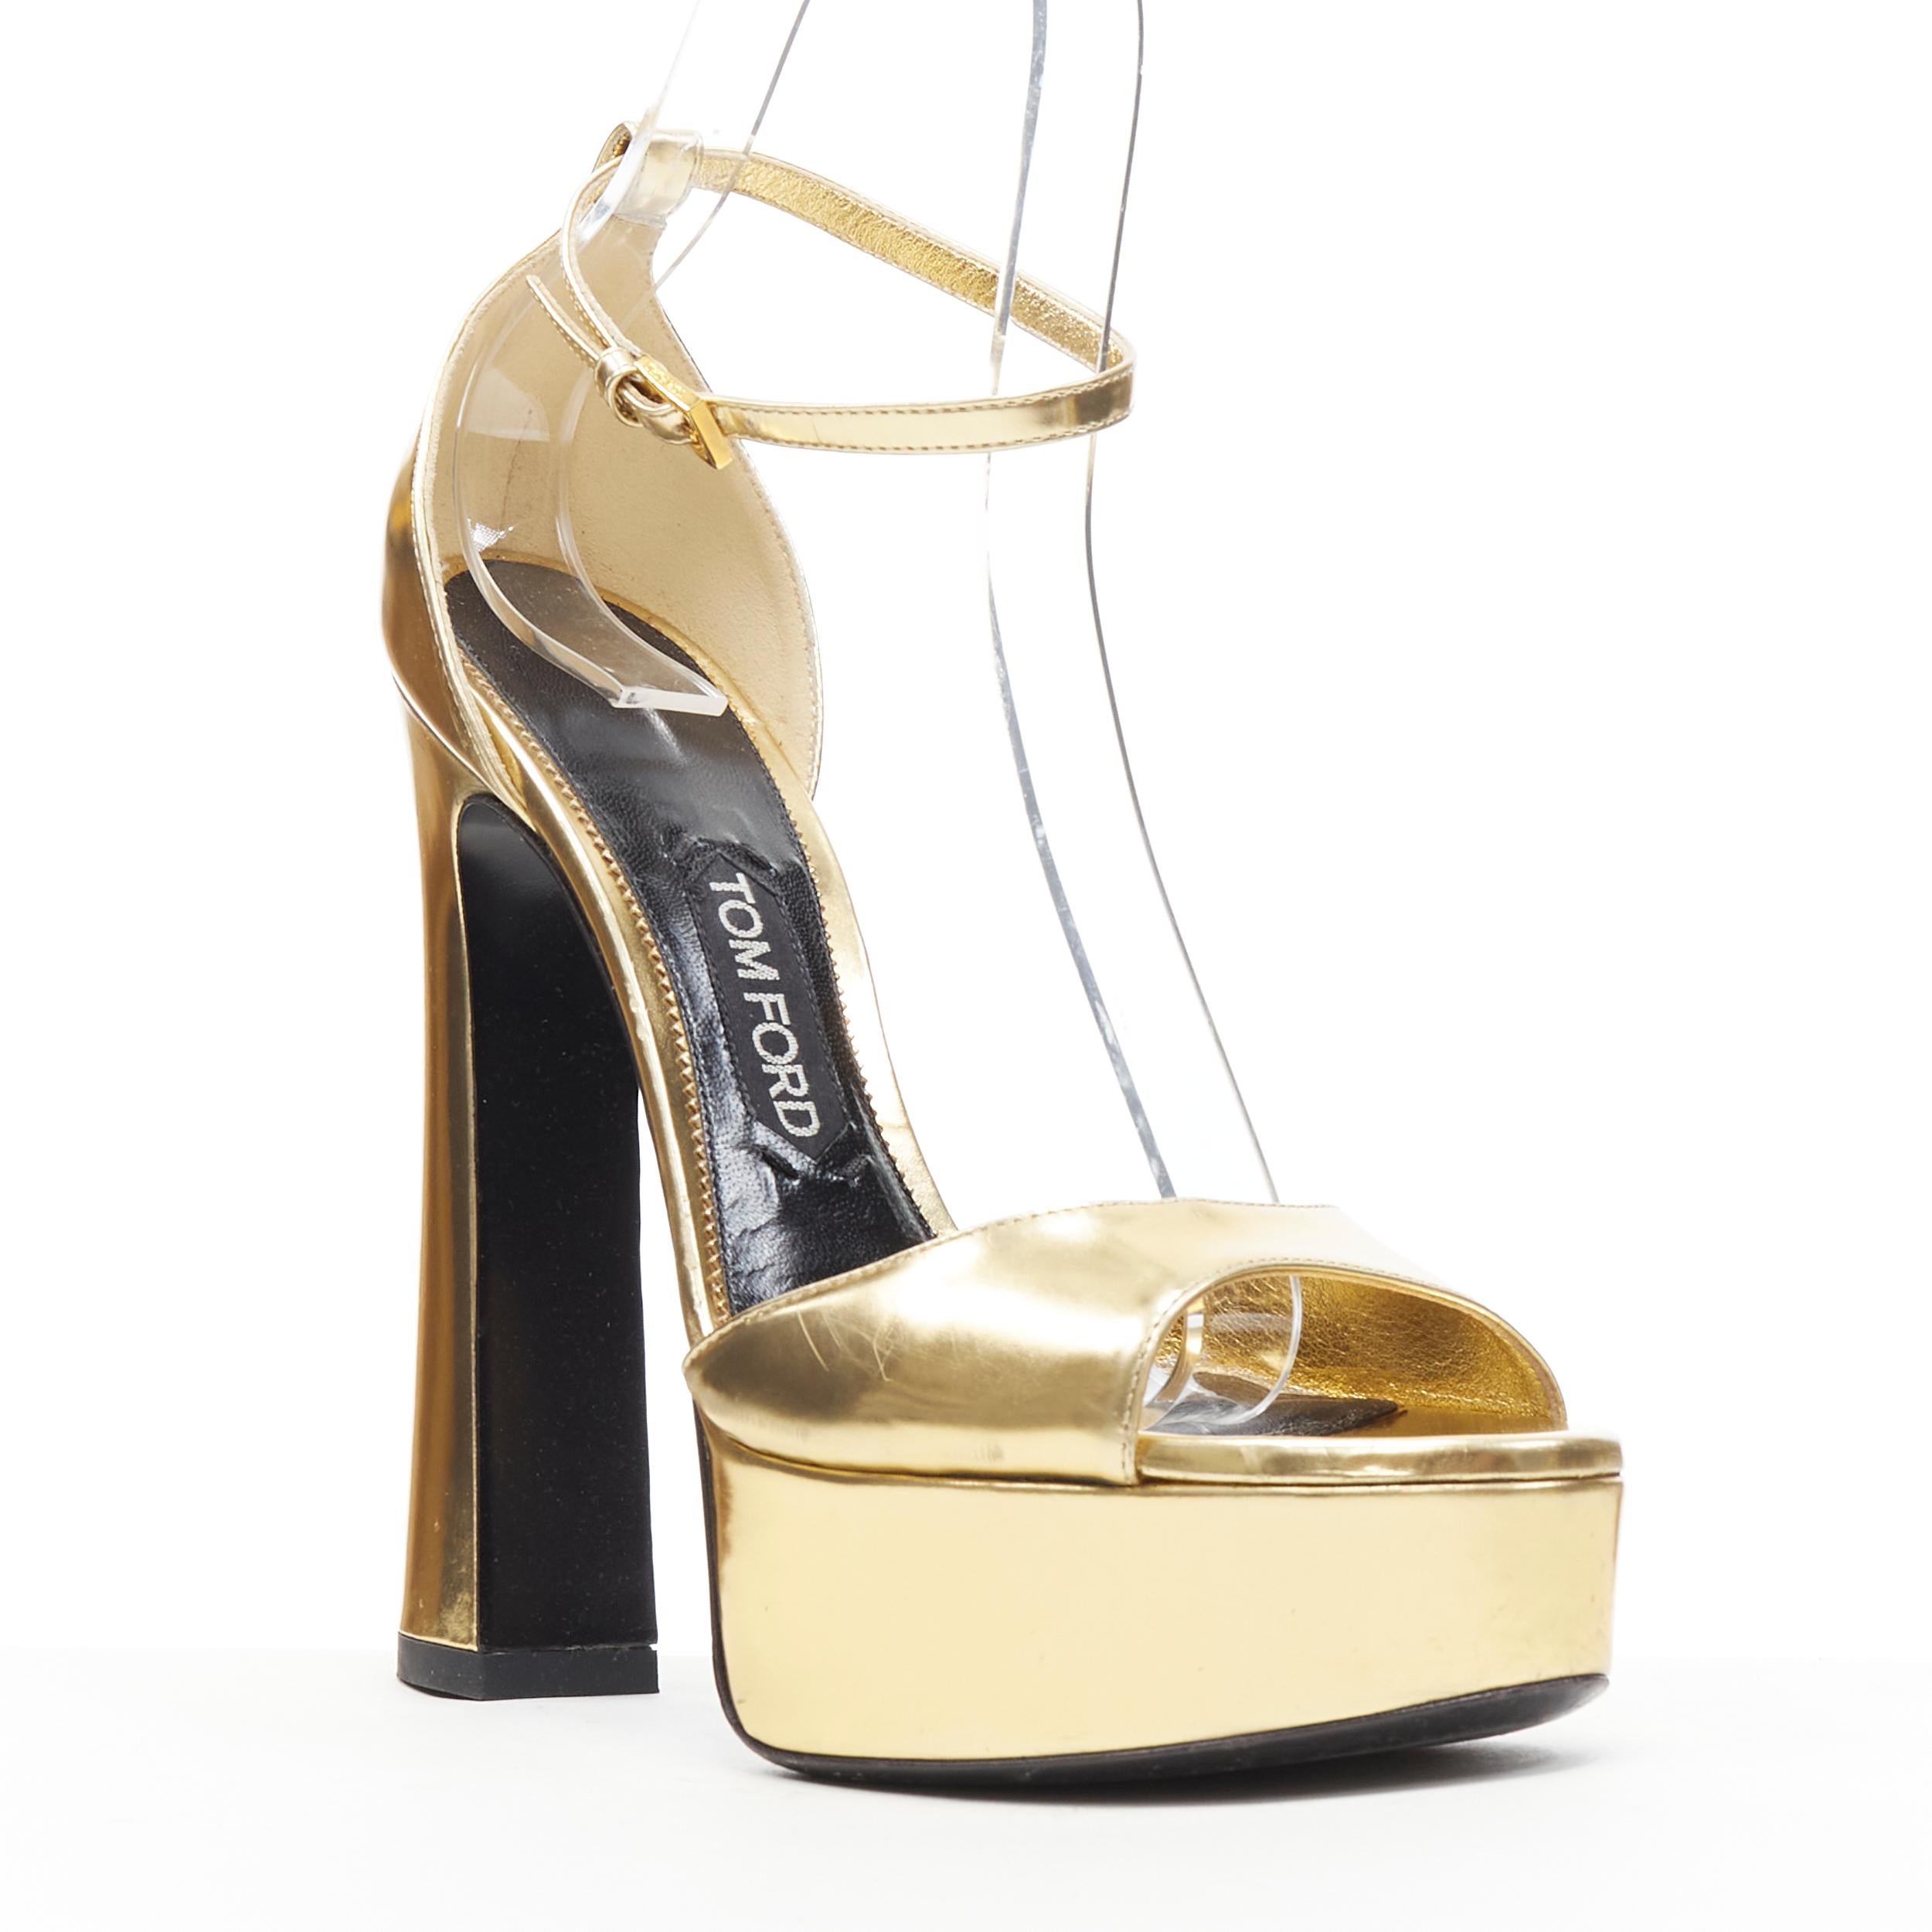 TOM FORD mirrored gold leather open toe platform chunky heel sandal EU39 
Reference: TGAS/B00220 
Brand: Tom Ford 
Designer: Tom Ford 
Material: Leather 
Color: Gold 
Pattern: Solid 
Closure: Ankle Strap 
Extra Detail: Ankle strap with gold tone